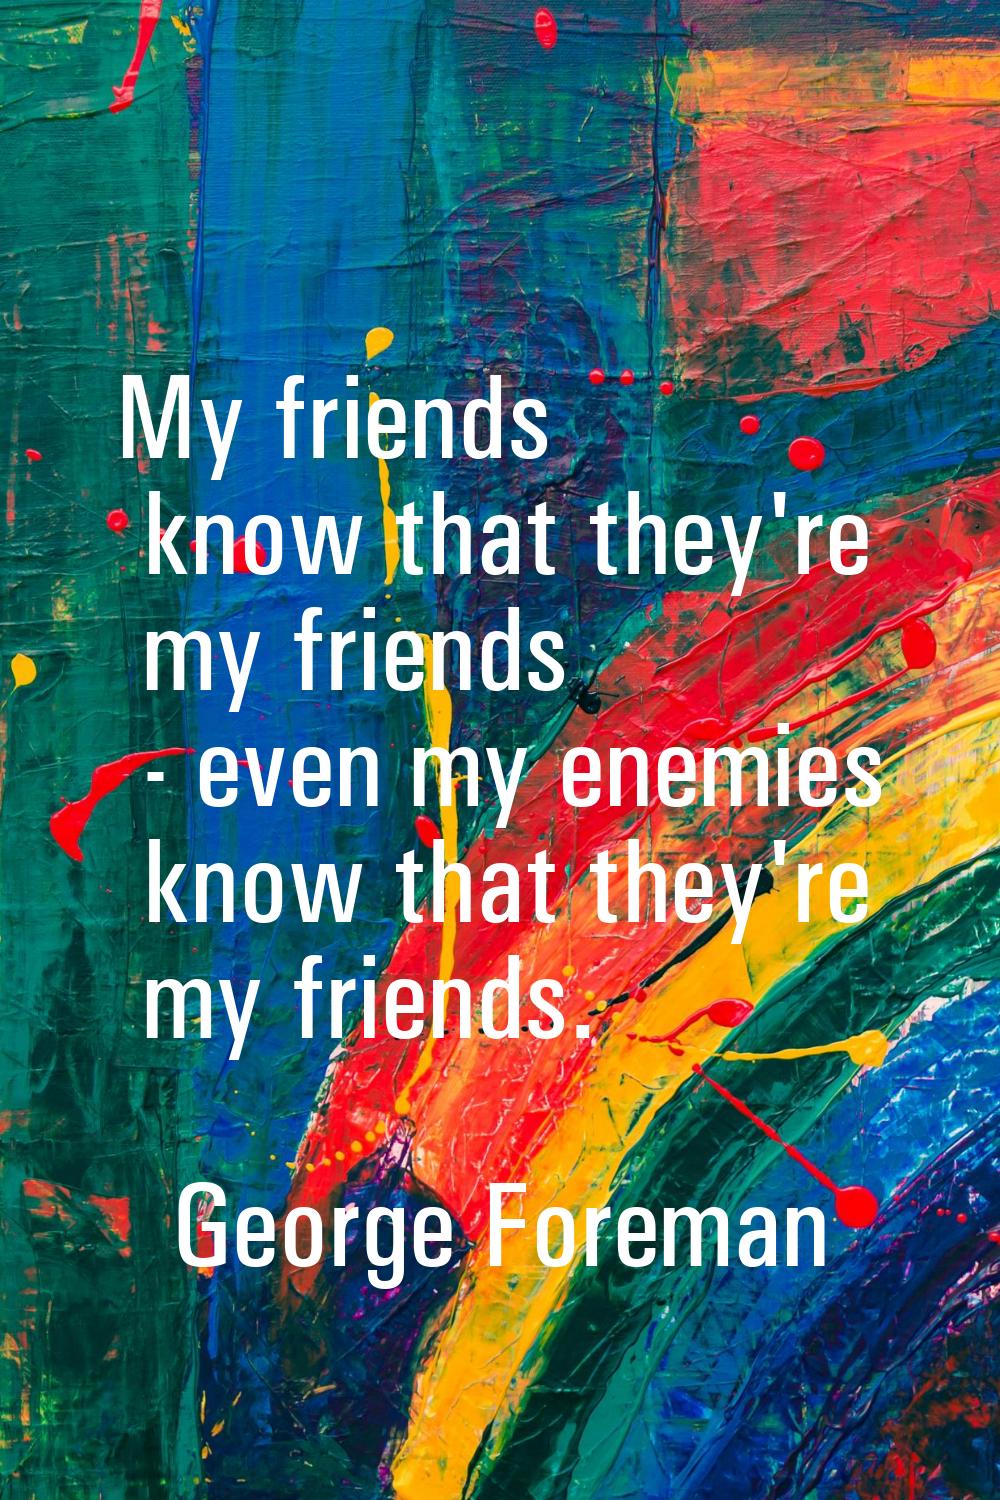 My friends know that they're my friends - even my enemies know that they're my friends.